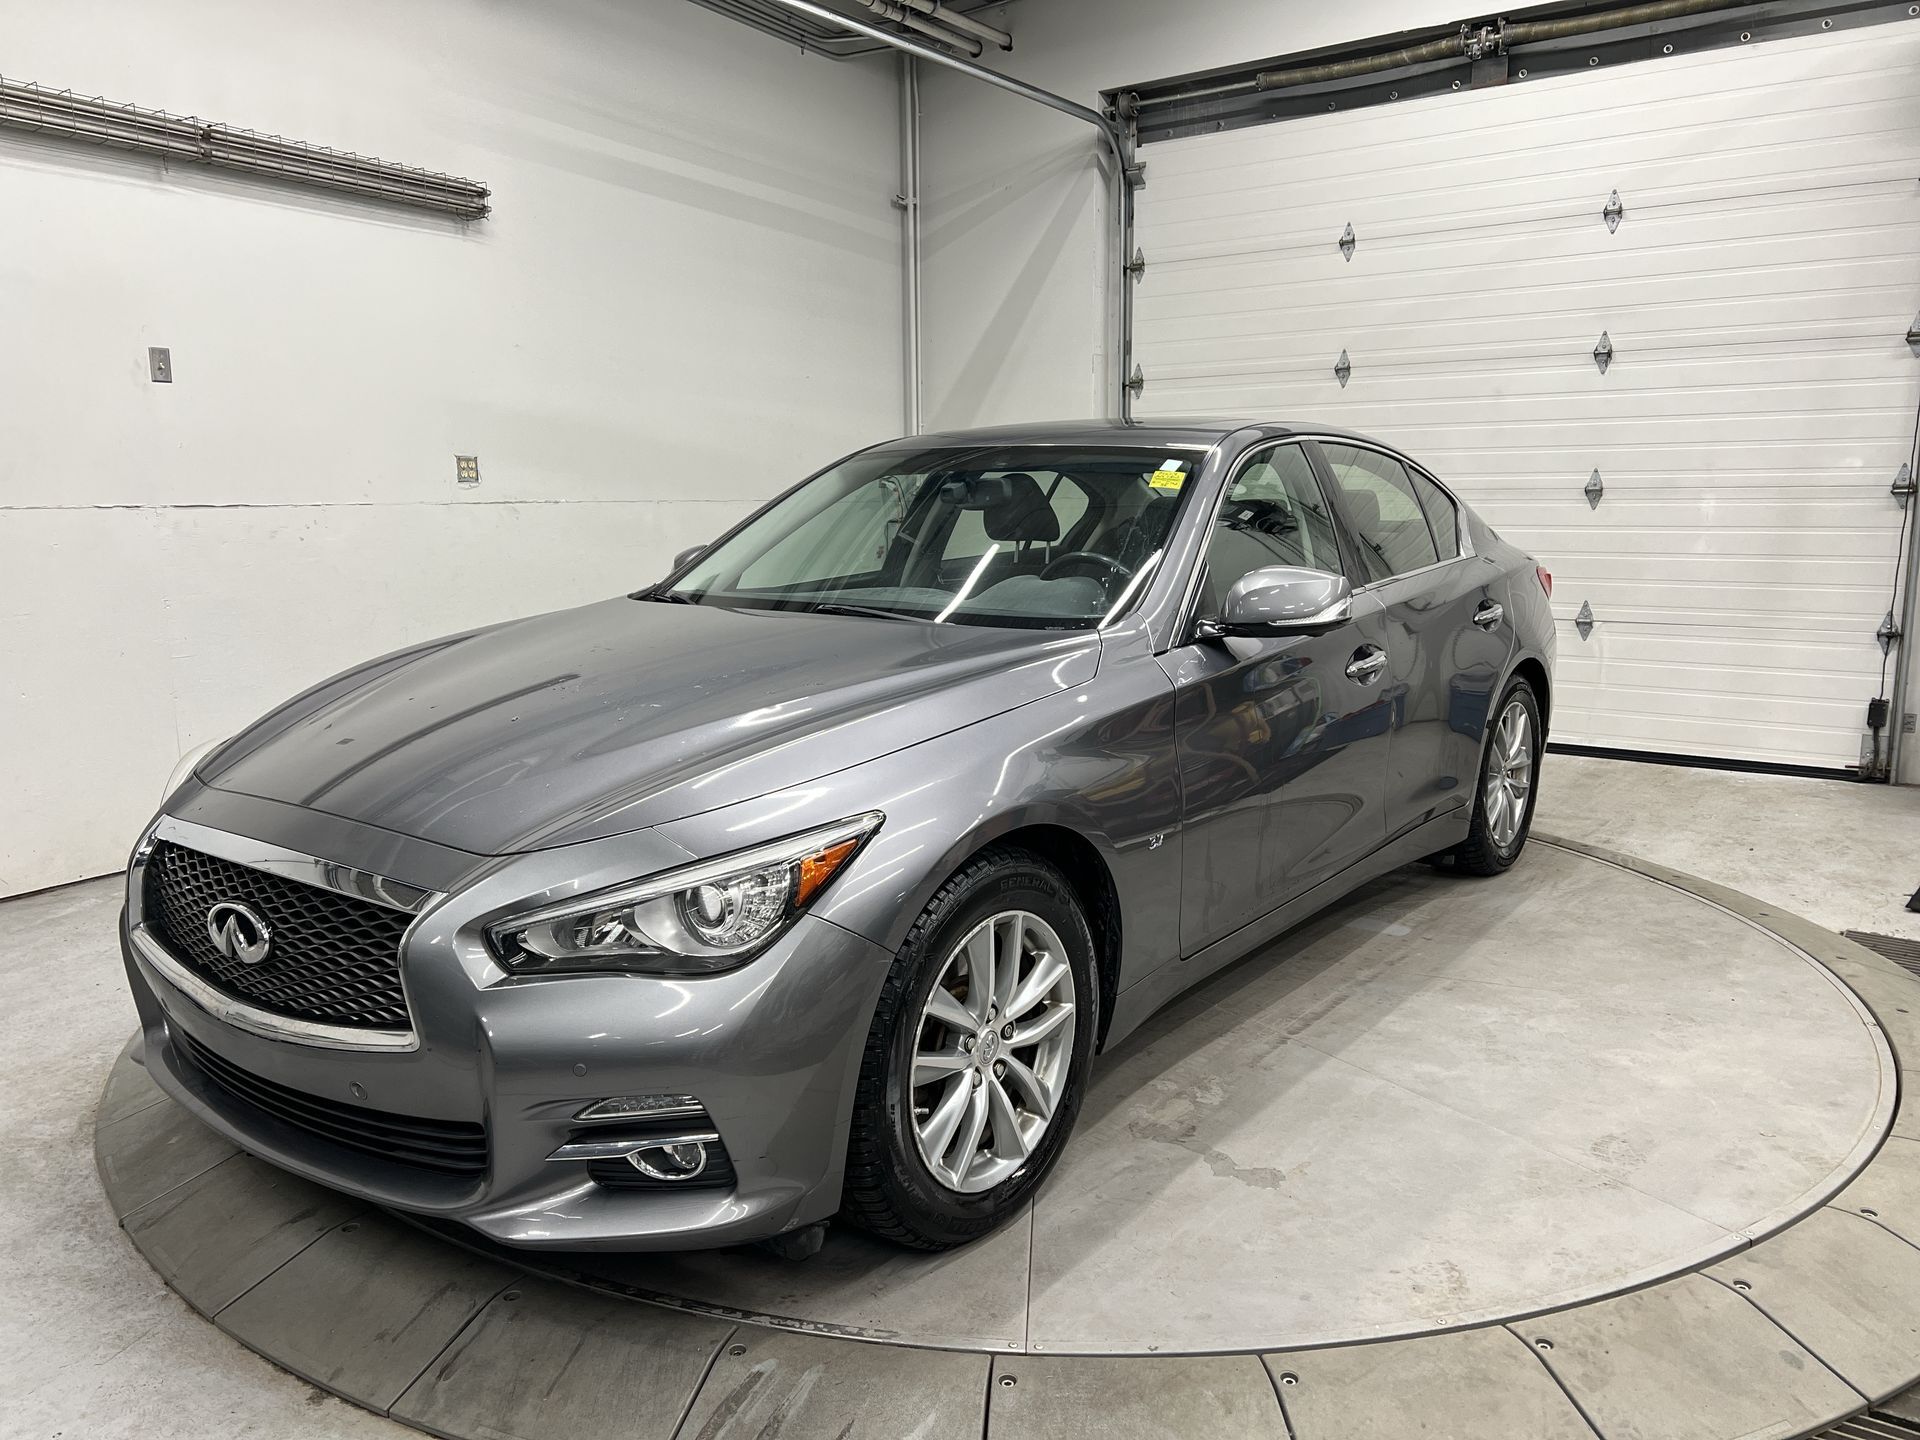 2014 Infiniti Q50 DELUXE TOURING AWD| 360 CAM | BLIND SPOT | LOADED!